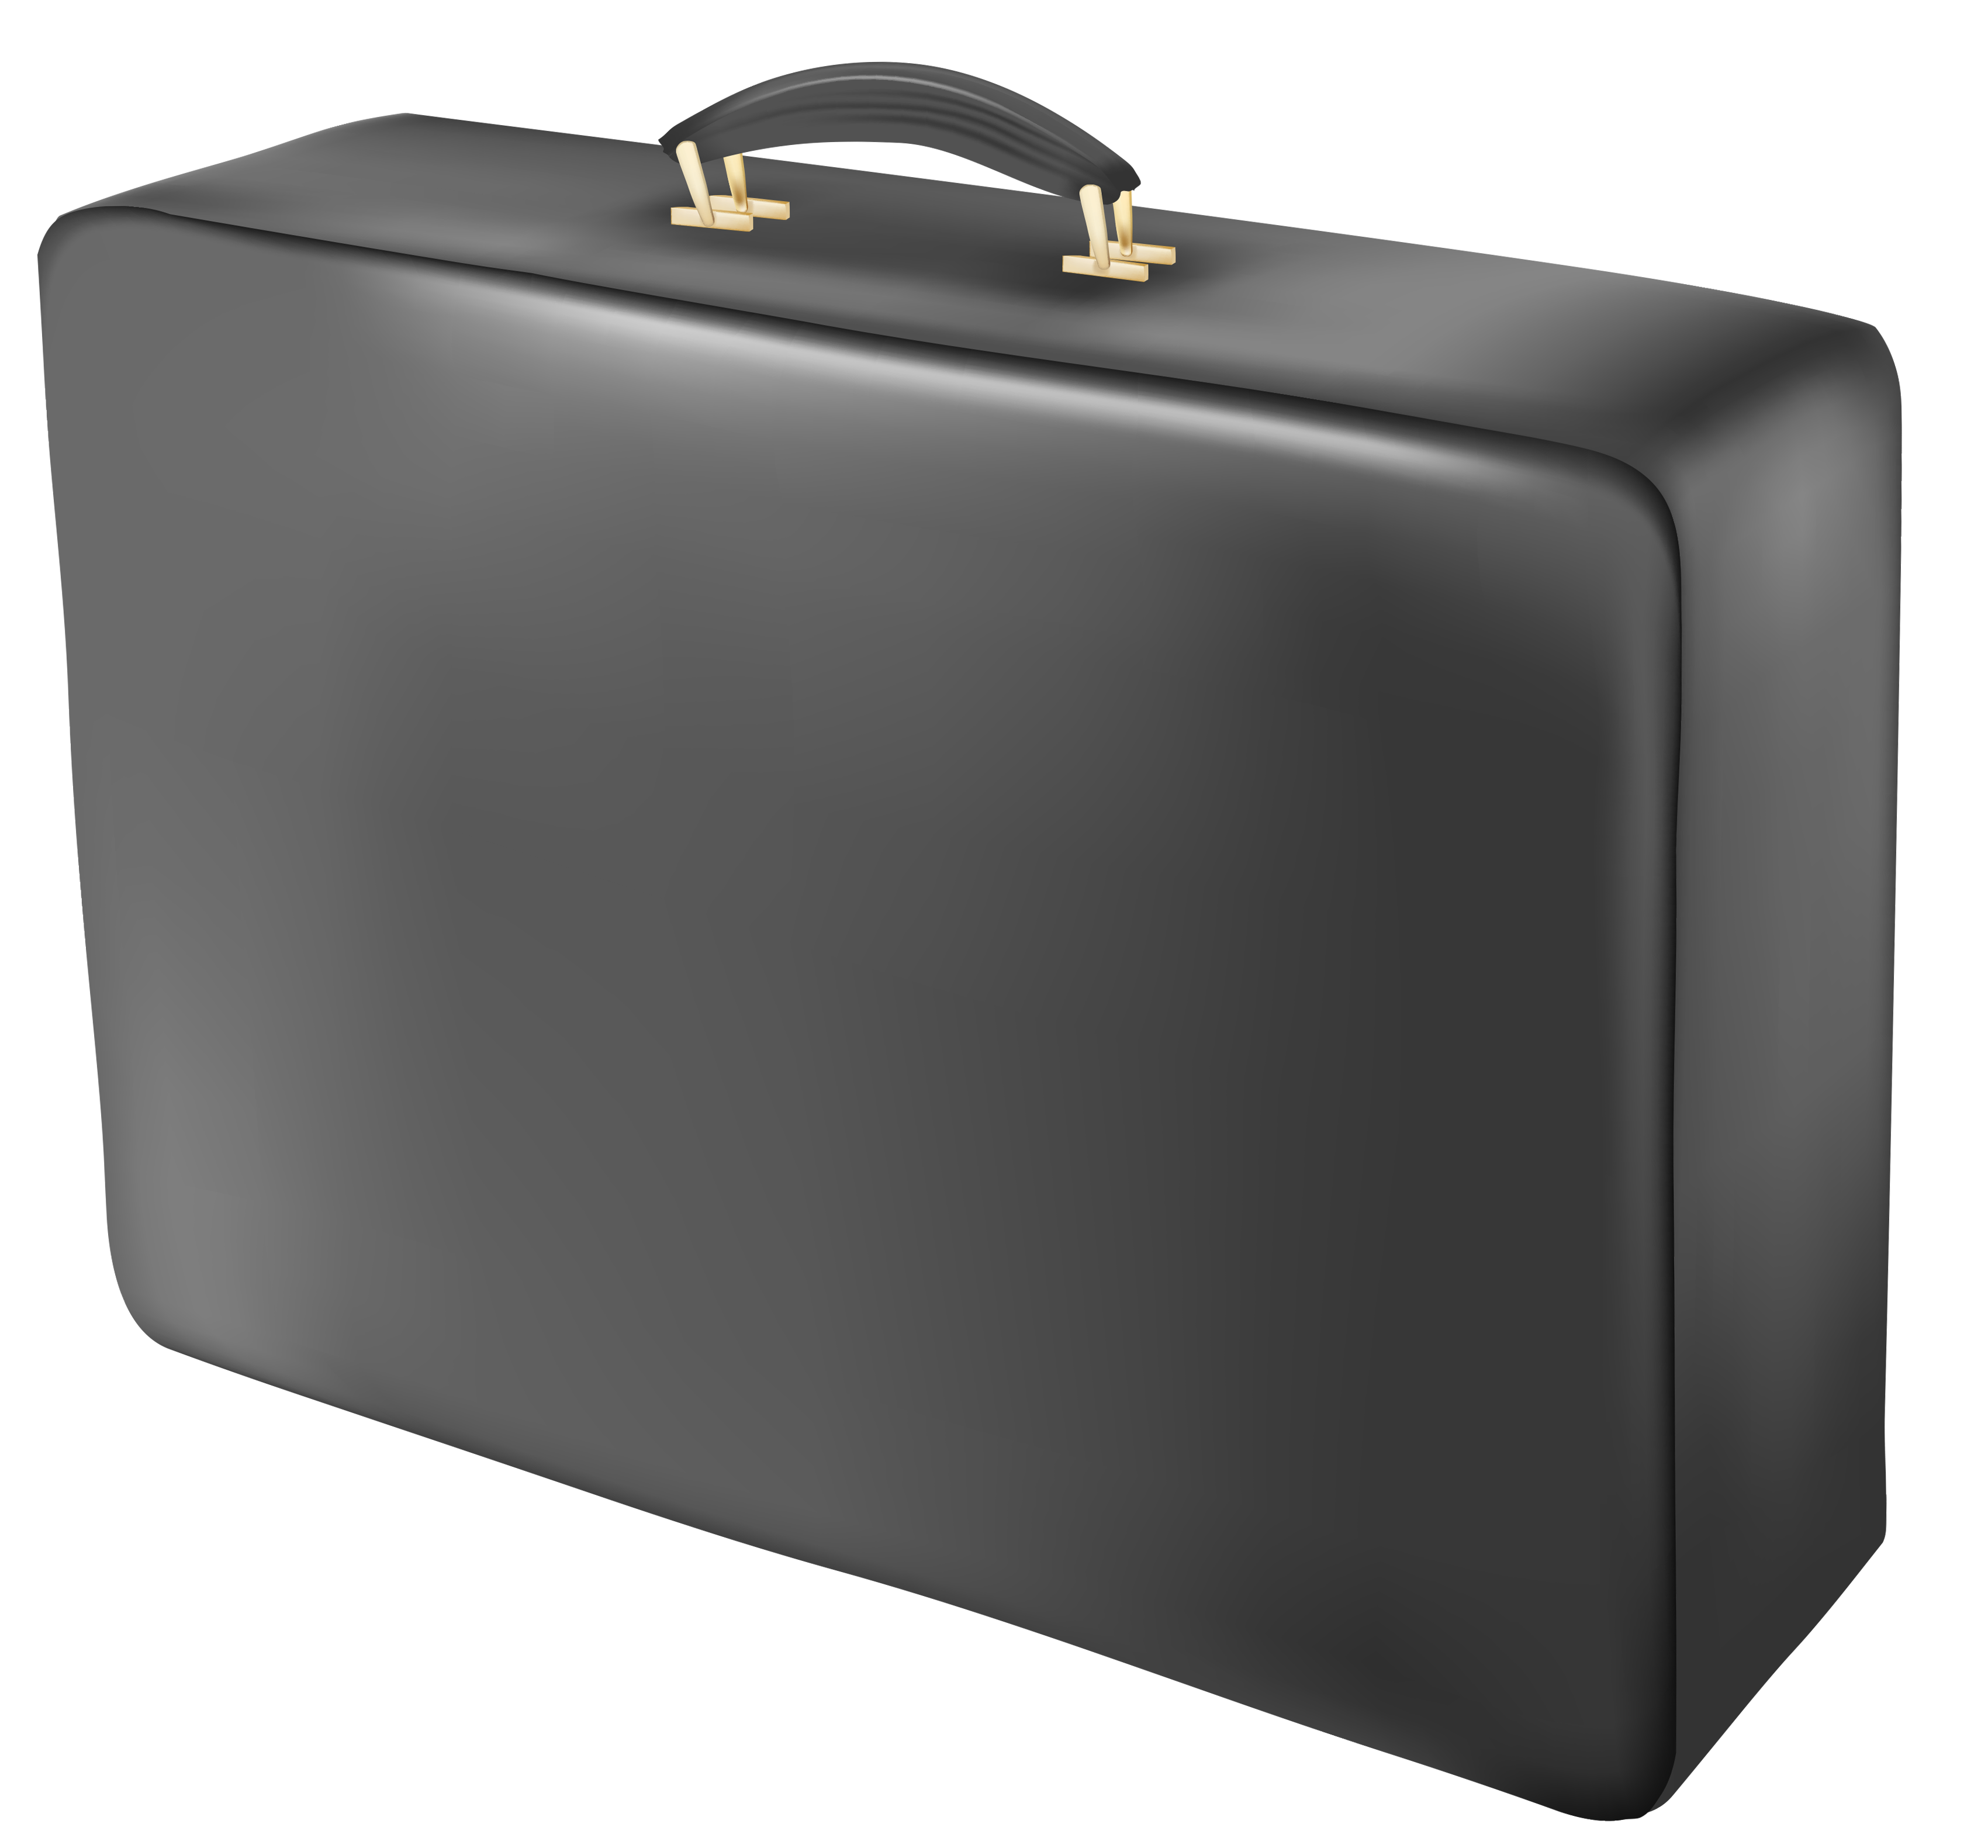 Suitcase PNG image